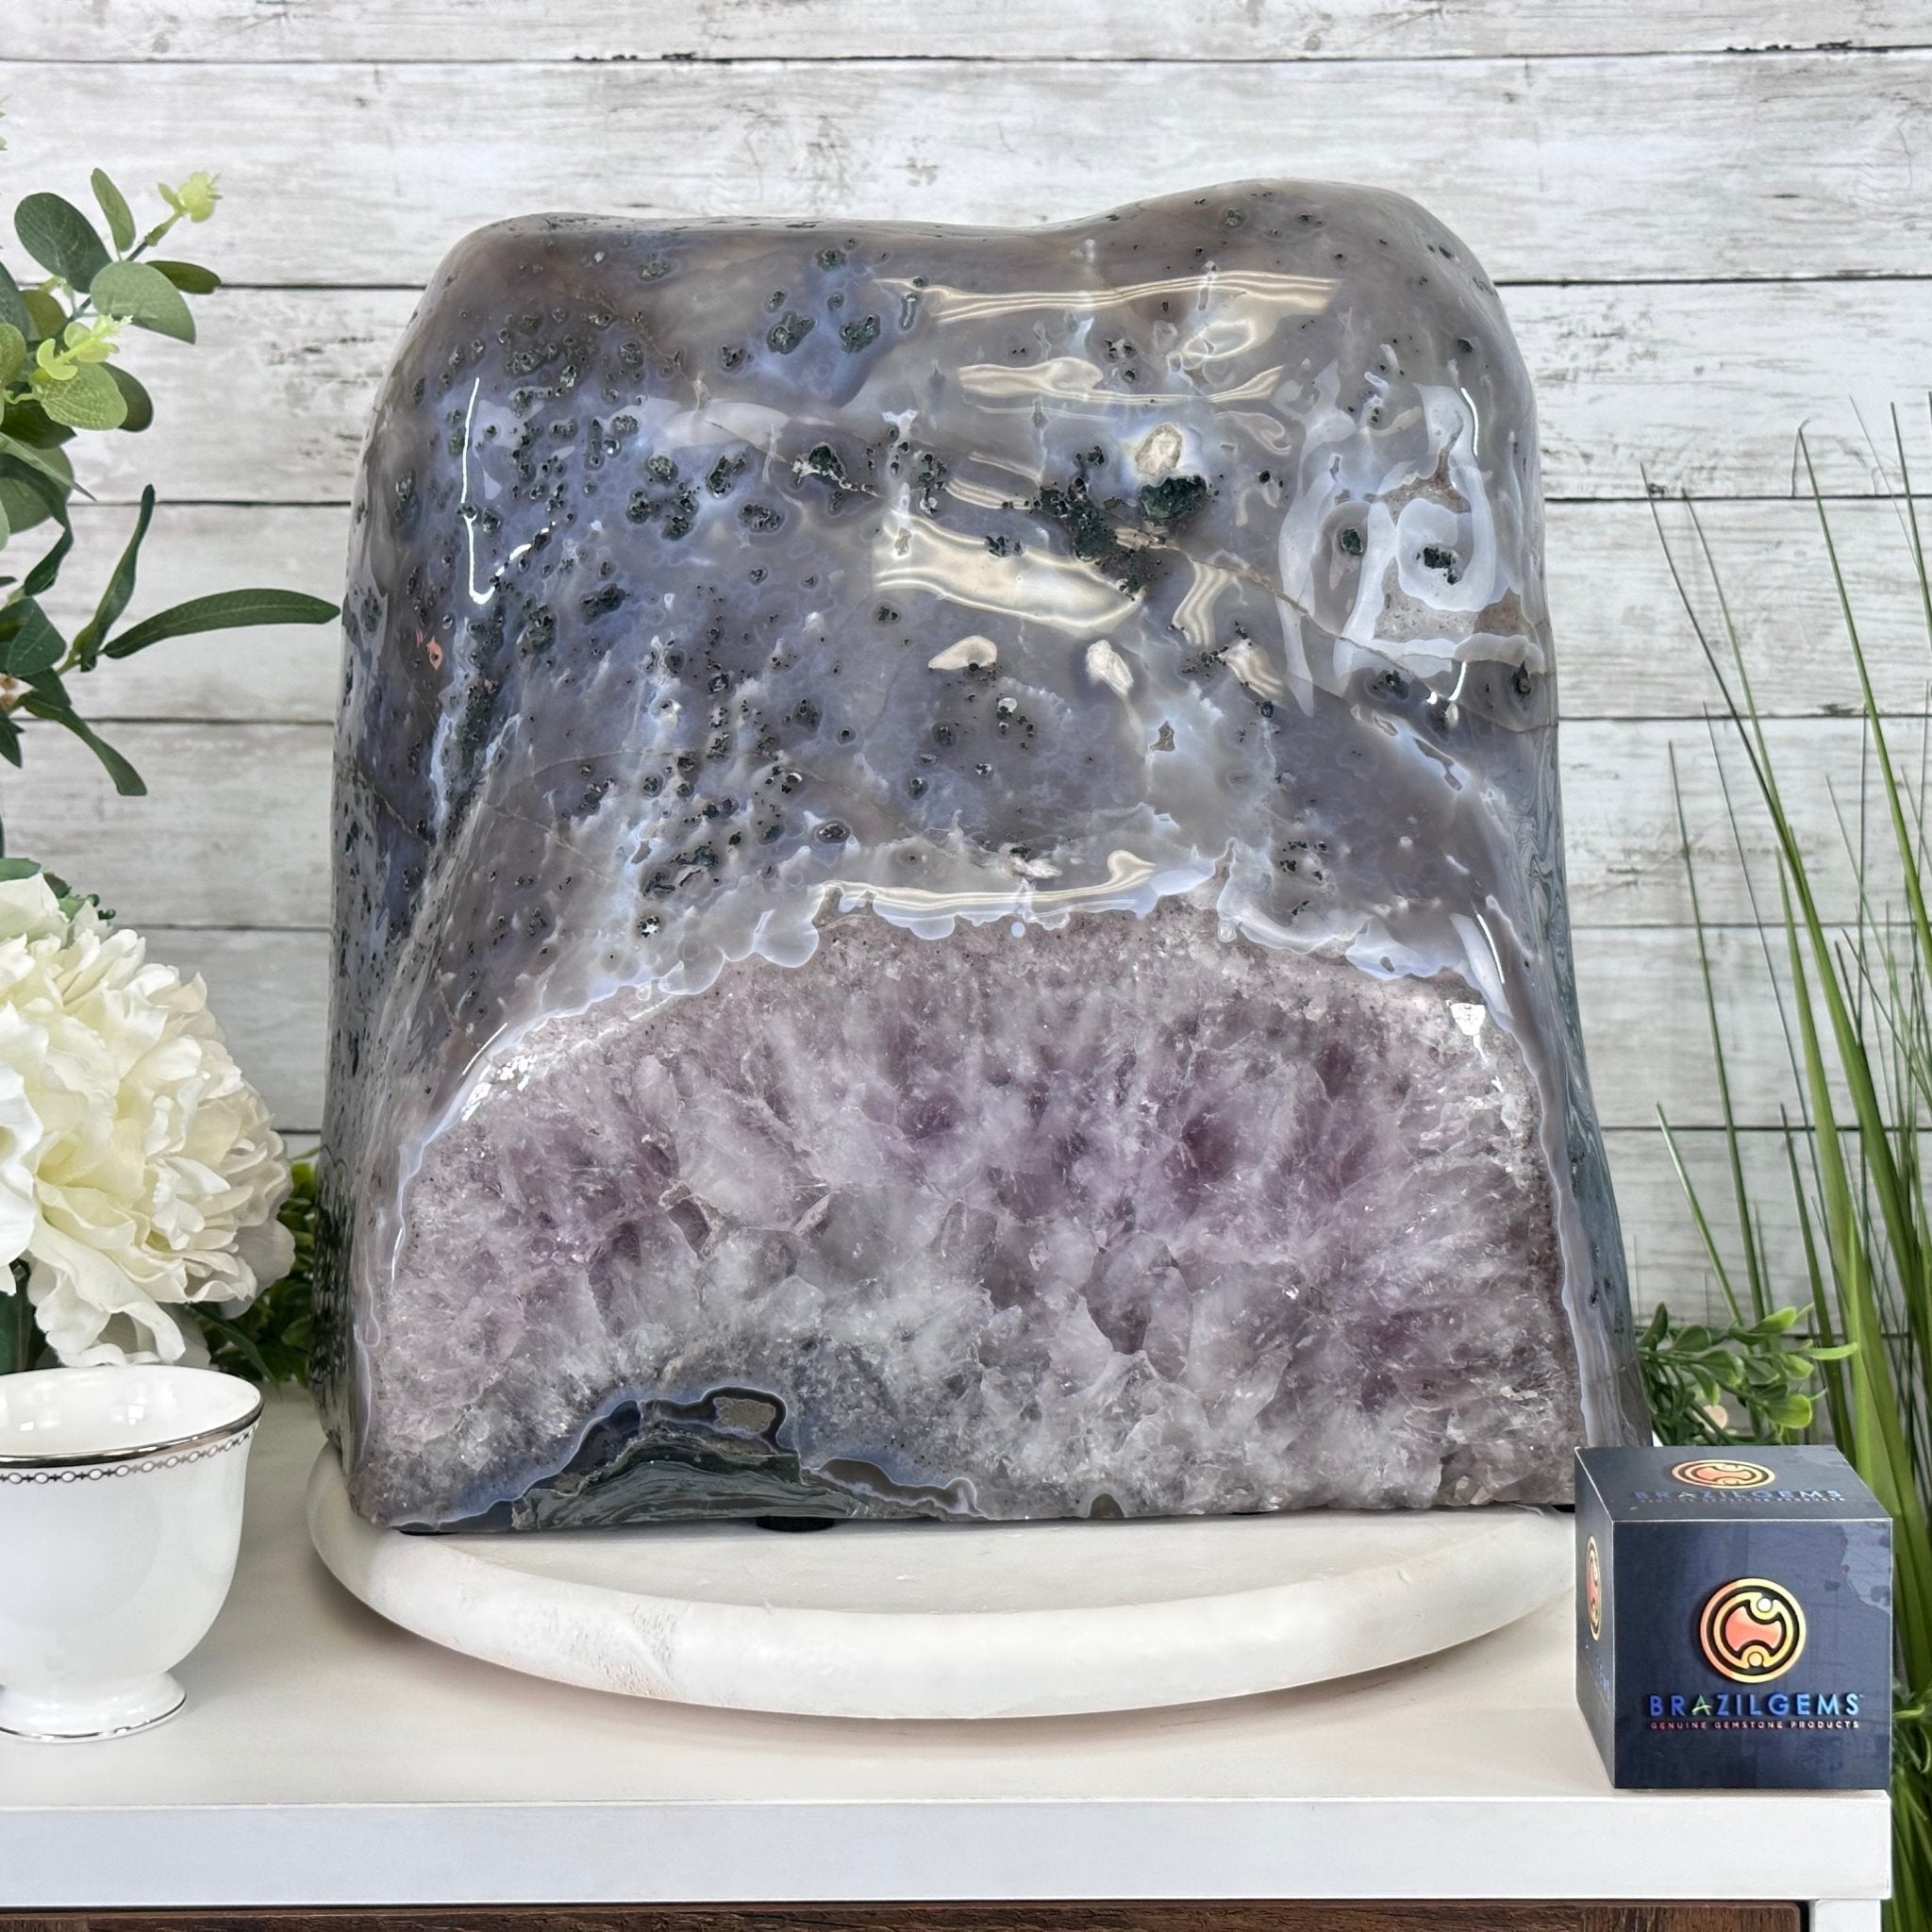 Extra Quality Polished Brazilian Amethyst Cathedral, 85.7 lbs & 13.9" tall Model #5602-0018 by Brazil Gems - Brazil GemsBrazil GemsExtra Quality Polished Brazilian Amethyst Cathedral, 85.7 lbs & 13.9" tall Model #5602-0018 by Brazil GemsPolished Cathedrals5602-0018